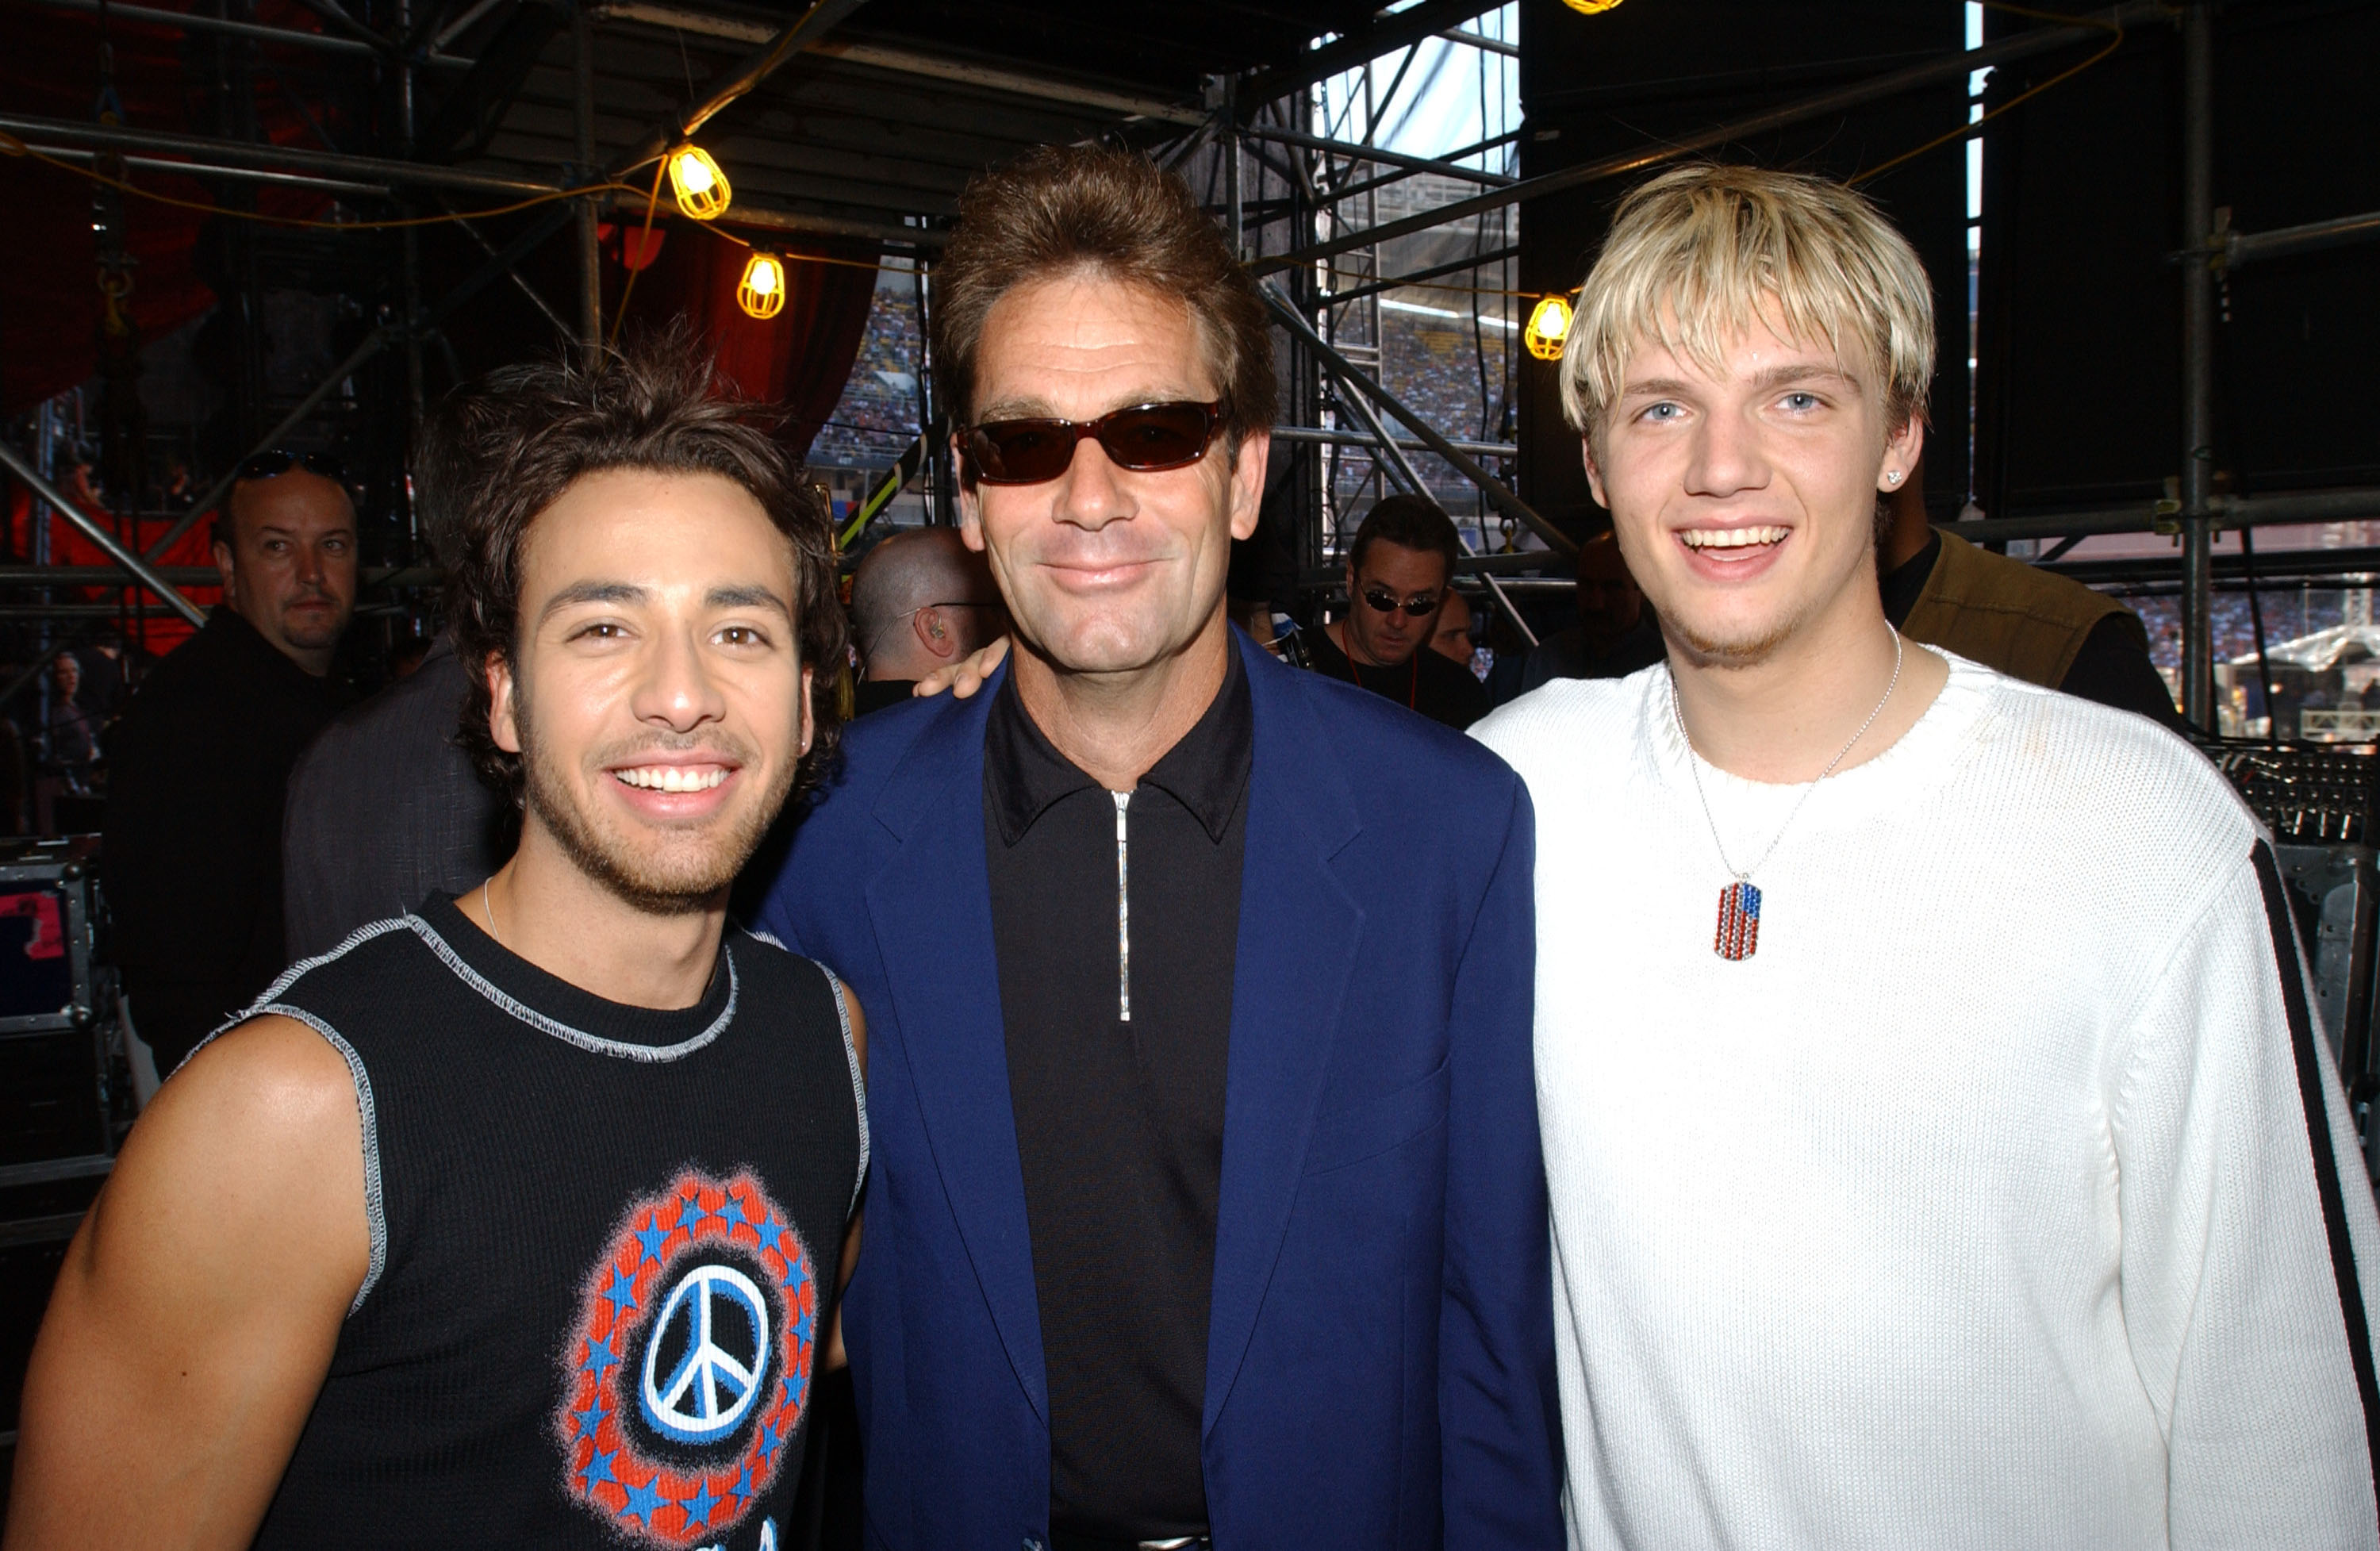 Howie Dorough and Nick Carter of the Backstreet Boys with the musical icon backstage at the United We Stand Concert on October 21, 2001. | Source: Getty Images